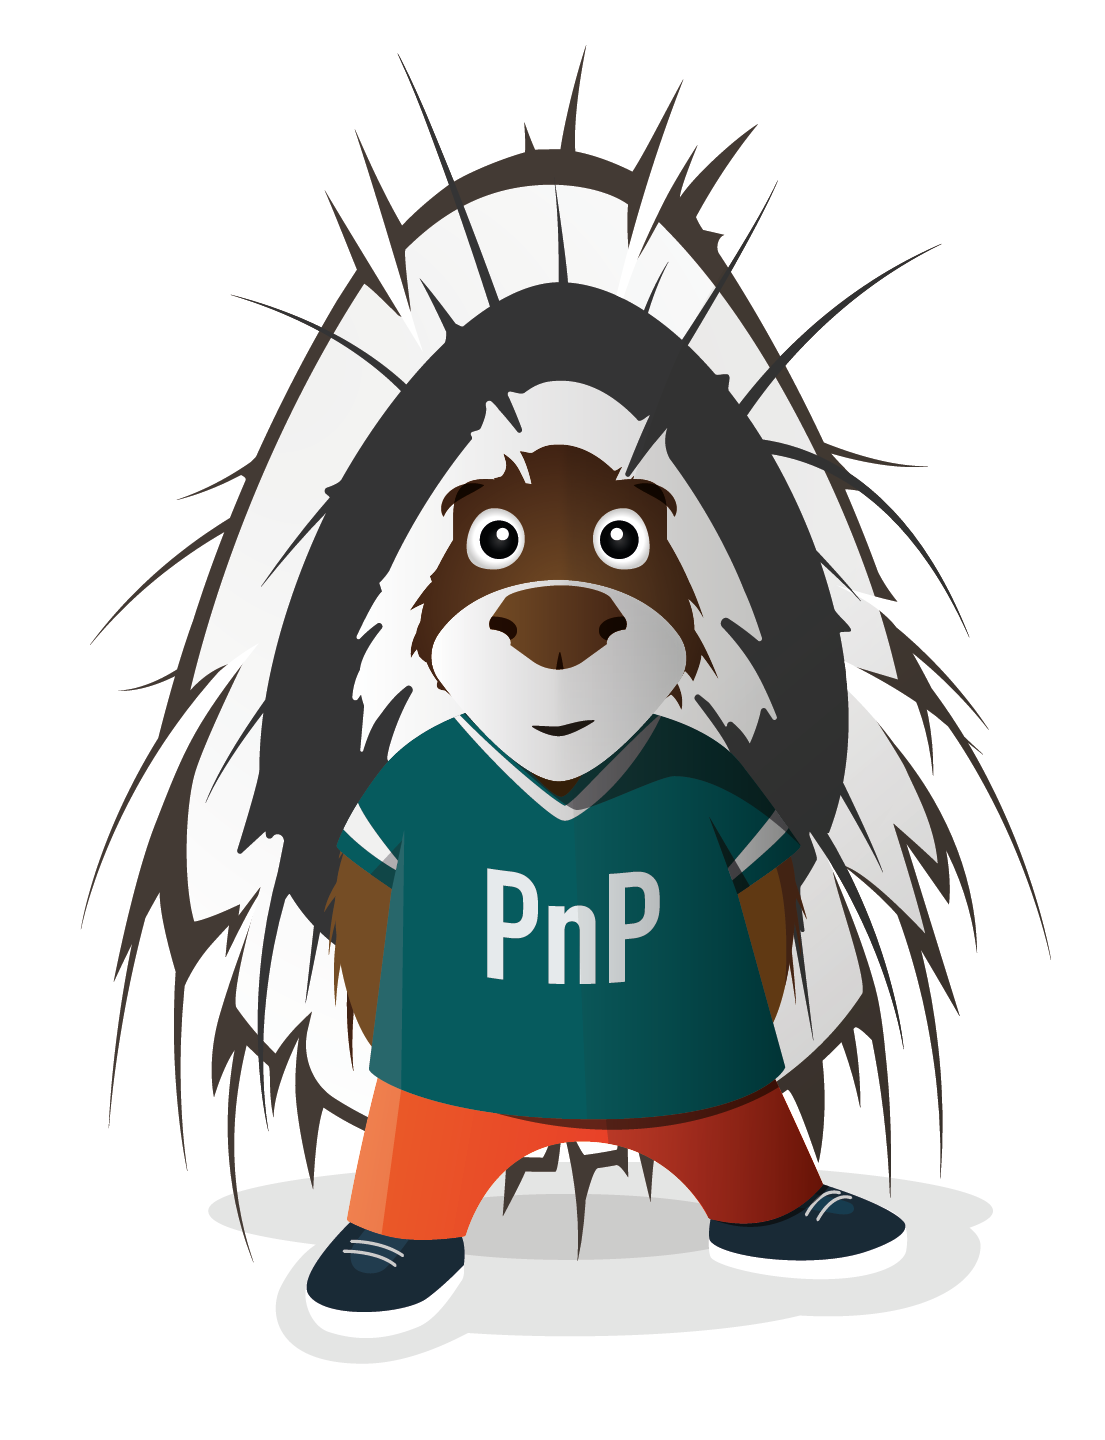 Parker the Porcupine, the Official Mascot of the PnP